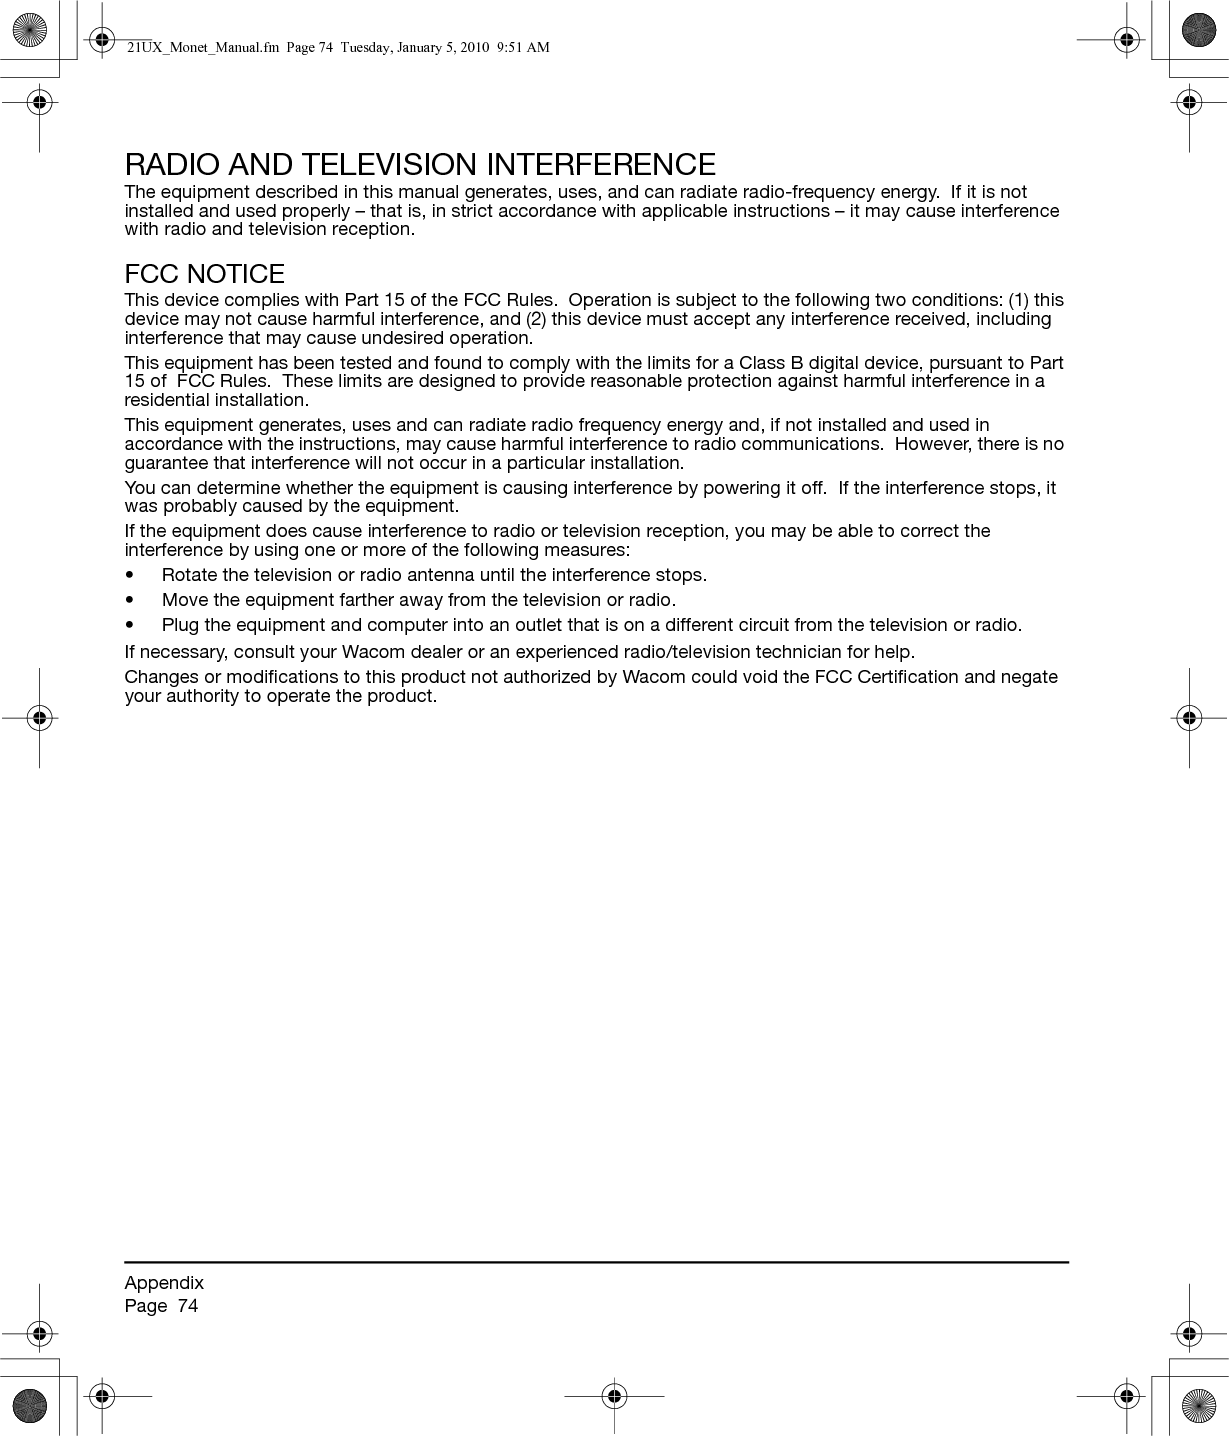 AppendixPage  74RADIO AND TELEVISION INTERFERENCEThe equipment described in this manual generates, uses, and can radiate radio-frequency energy.  If it is not installed and used properly – that is, in strict accordance with applicable instructions – it may cause interference with radio and television reception.FCC NOTICEThis device complies with Part 15 of the FCC Rules.  Operation is subject to the following two conditions: (1) this device may not cause harmful interference, and (2) this device must accept any interference received, including interference that may cause undesired operation.This equipment has been tested and found to comply with the limits for a Class B digital device, pursuant to Part 15 of  FCC Rules.  These limits are designed to provide reasonable protection against harmful interference in a residential installation.This equipment generates, uses and can radiate radio frequency energy and, if not installed and used in accordance with the instructions, may cause harmful interference to radio communications.  However, there is no guarantee that interference will not occur in a particular installation.You can determine whether the equipment is causing interference by powering it off.  If the interference stops, it was probably caused by the equipment.If the equipment does cause interference to radio or television reception, you may be able to correct the interference by using one or more of the following measures:• Rotate the television or radio antenna until the interference stops.• Move the equipment farther away from the television or radio.• Plug the equipment and computer into an outlet that is on a different circuit from the television or radio.If necessary, consult your Wacom dealer or an experienced radio/television technician for help.Changes or modifications to this product not authorized by Wacom could void the FCC Certification and negate your authority to operate the product.21UX_Monet_Manual.fm  Page 74  Tuesday, January 5, 2010  9:51 AM